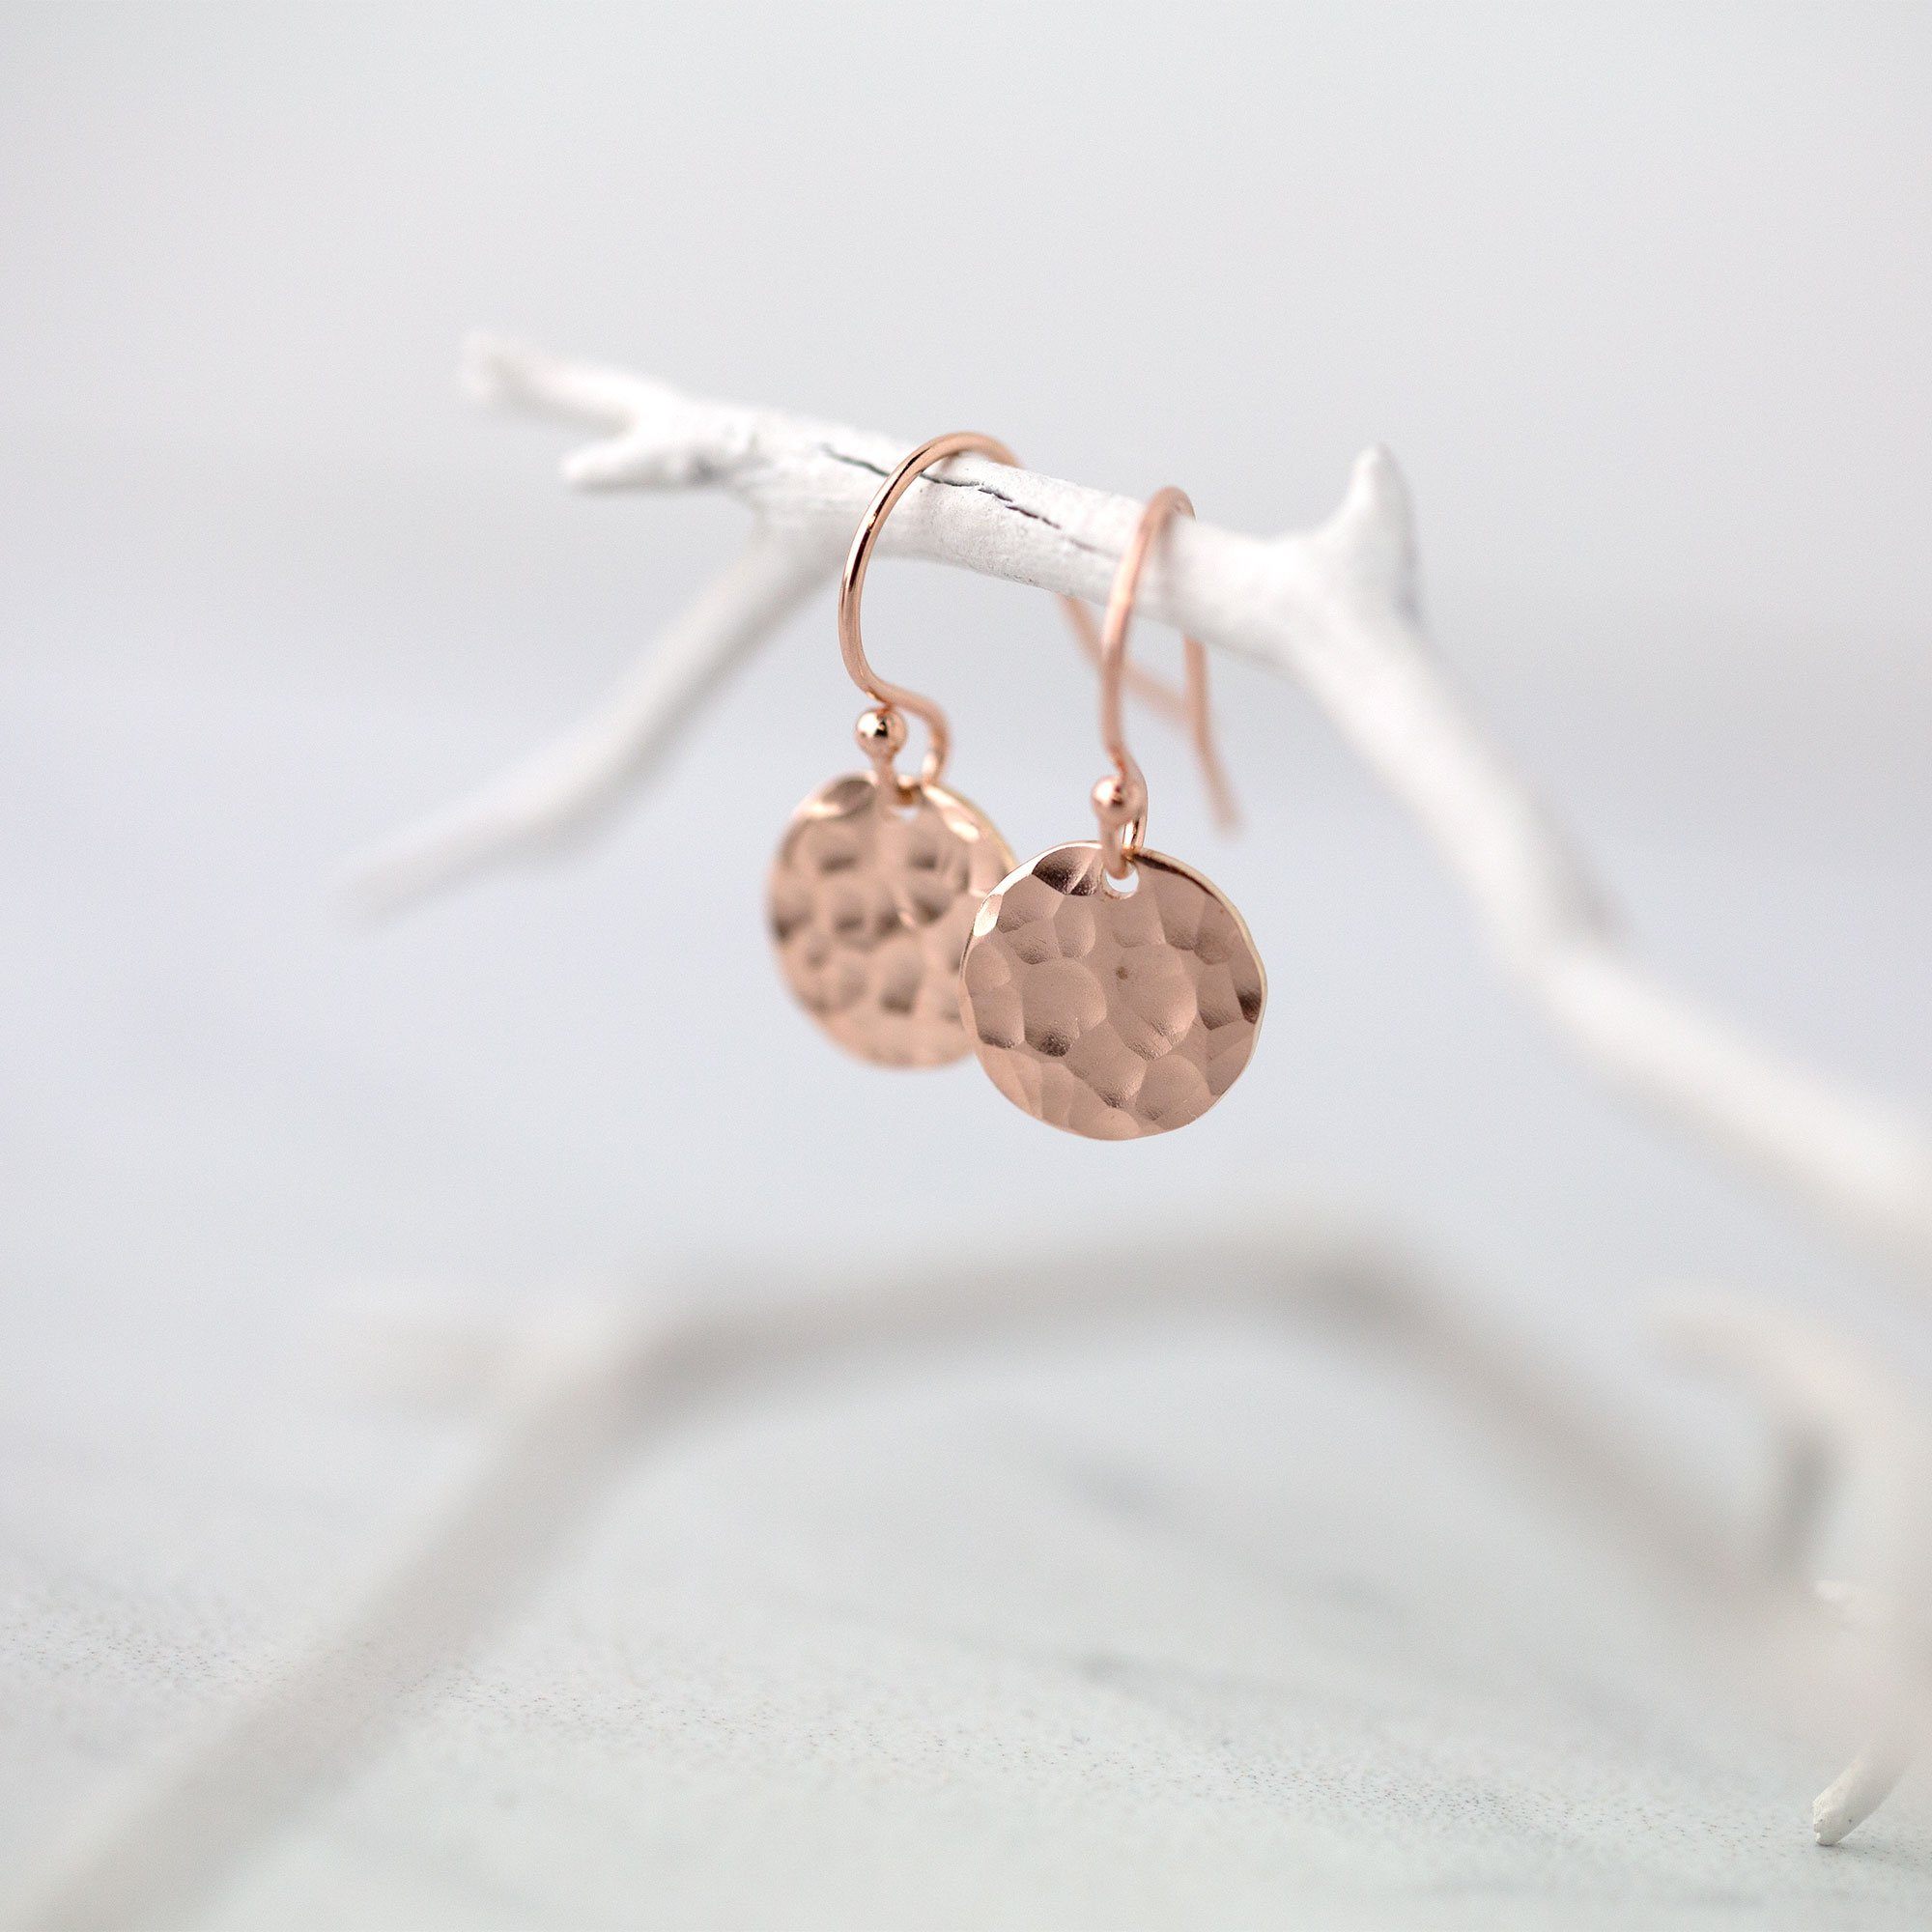 Hammered Disc Earrings - Rose Gold Fill - Handmade Jewelry by Burnish